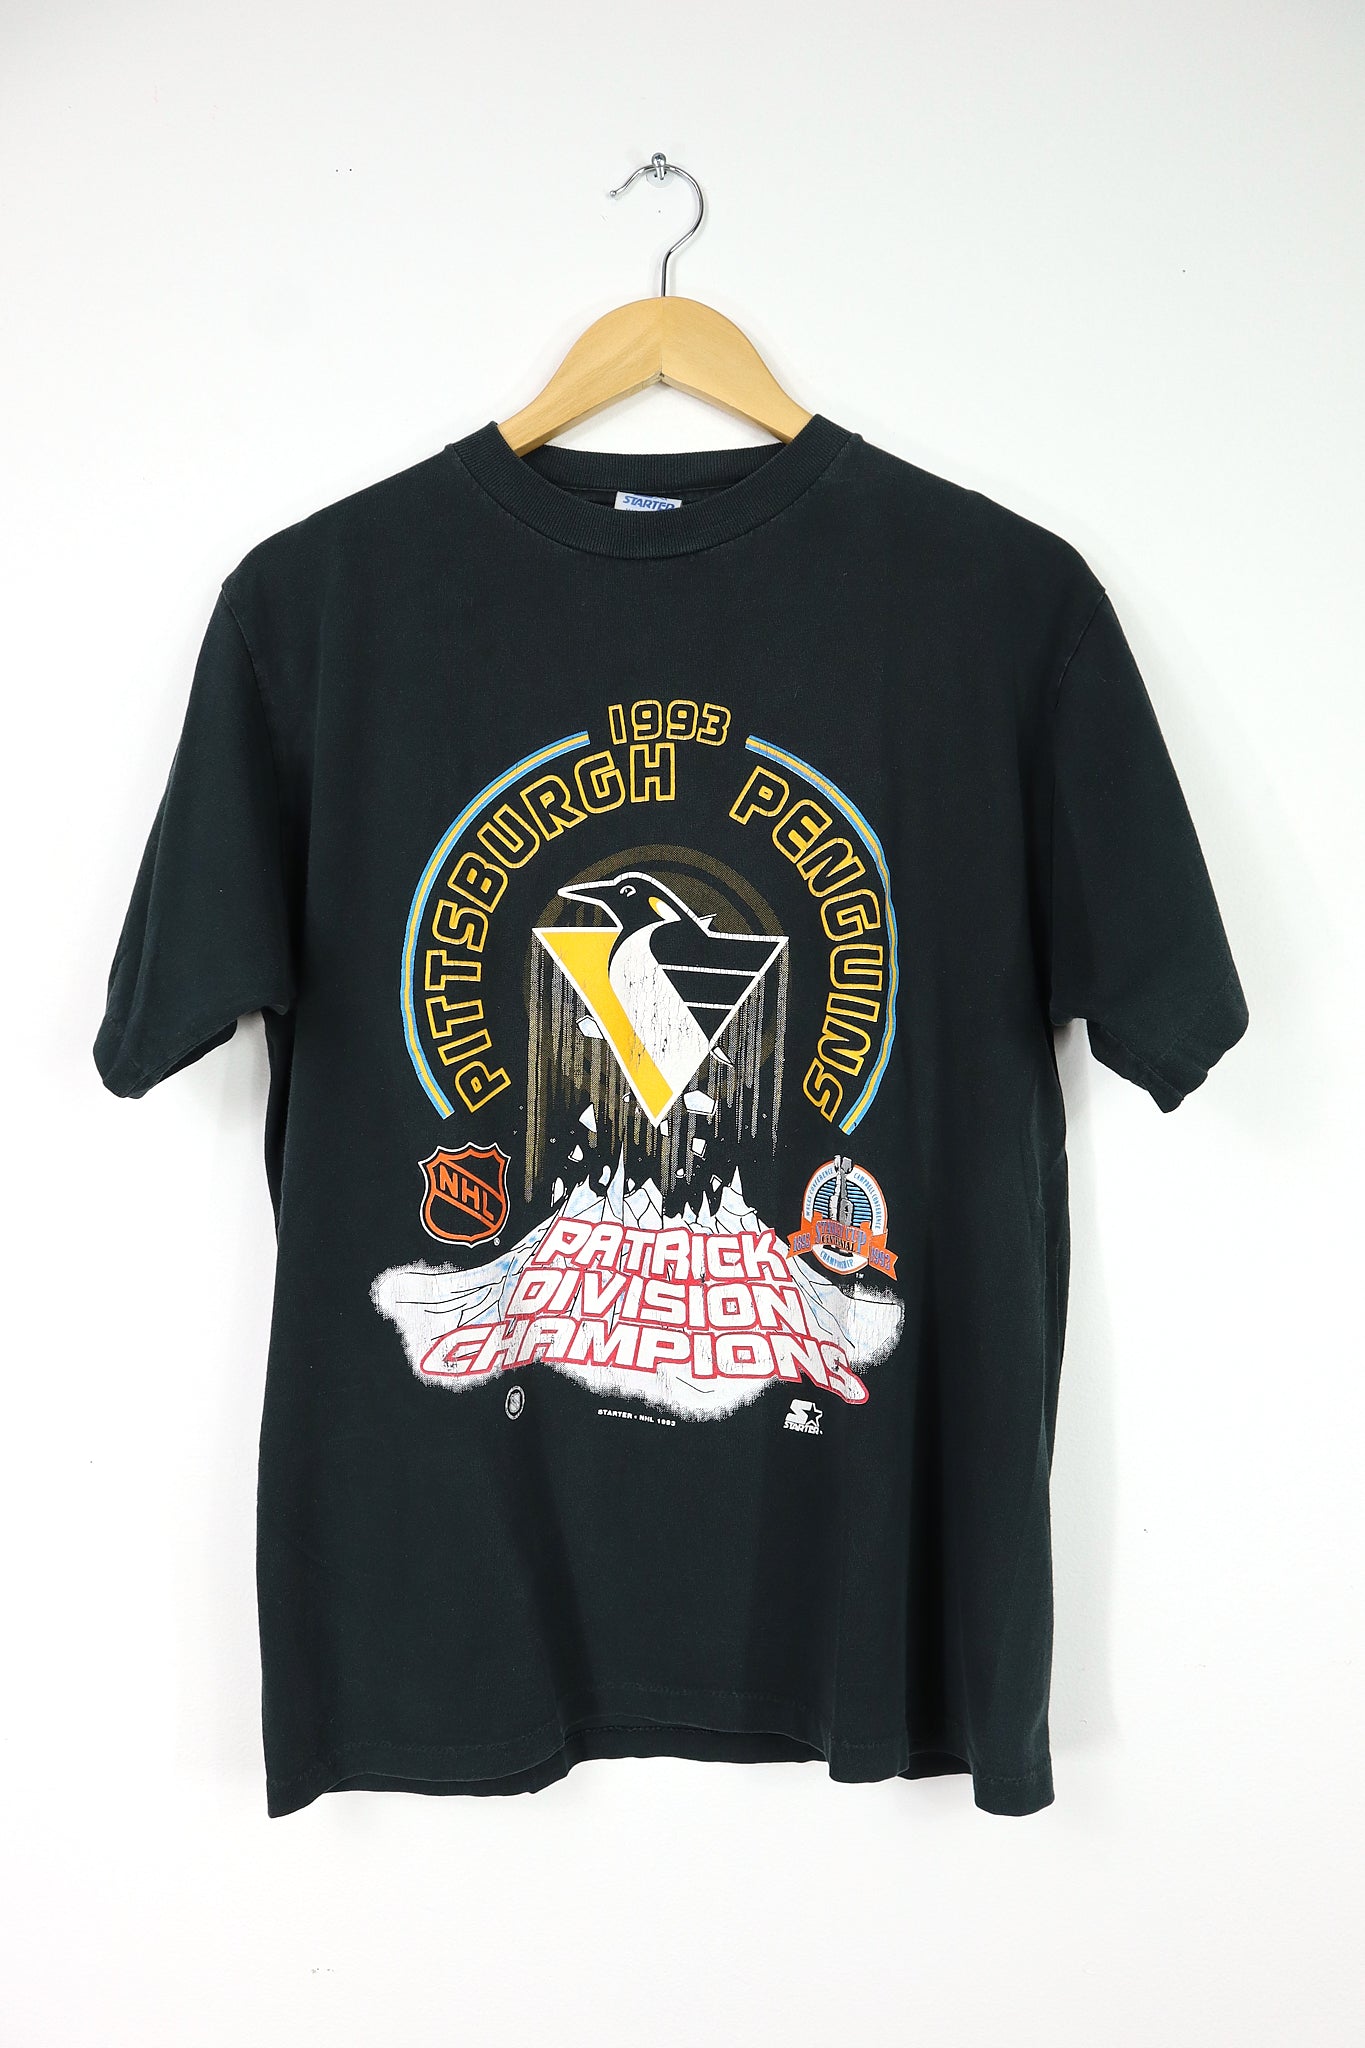 Vintage 1993 Pittsburgh Penguins Division Champions Tee